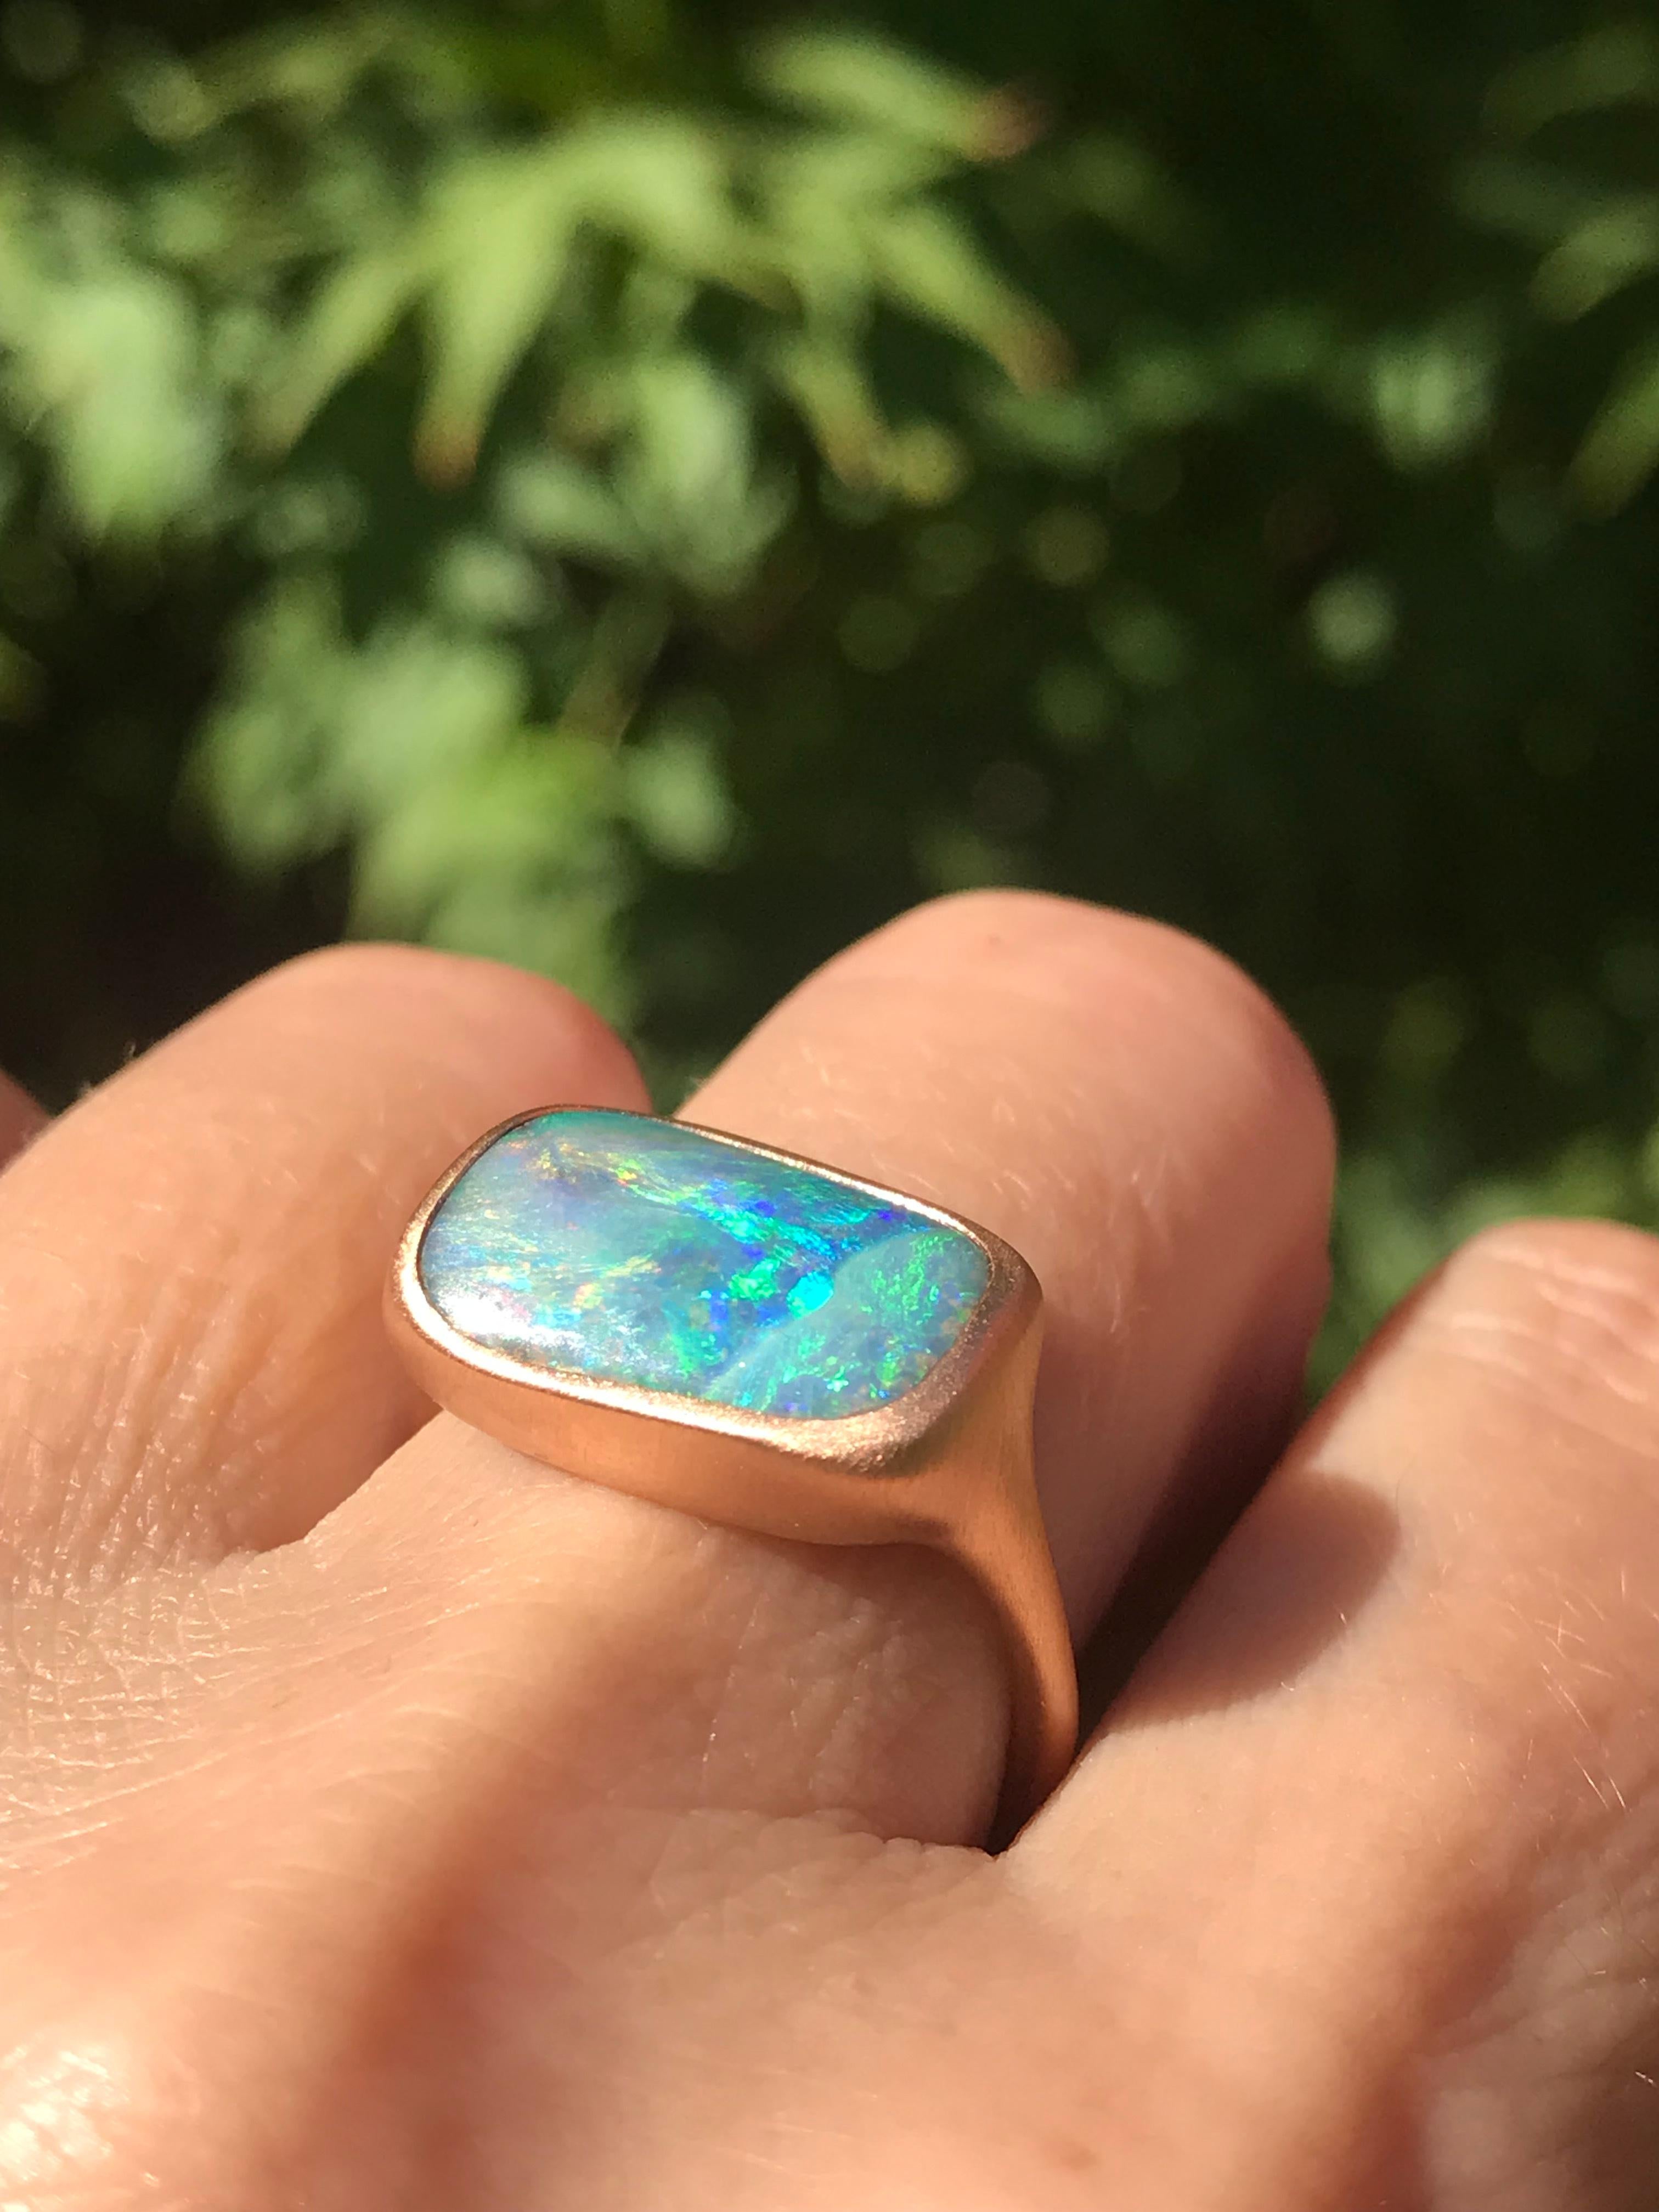 Dalben design One of a kind 18 kt rose  gold ring with a pastel colors solid Australian Boulder Opal weight 5,35 carats  .
Ring size  US 7    -  EU 54 1/2 re-sizable .  
Bezels setting dimension:  
max width 17,2 mm,  
max height 11,3 mm. 
The ring